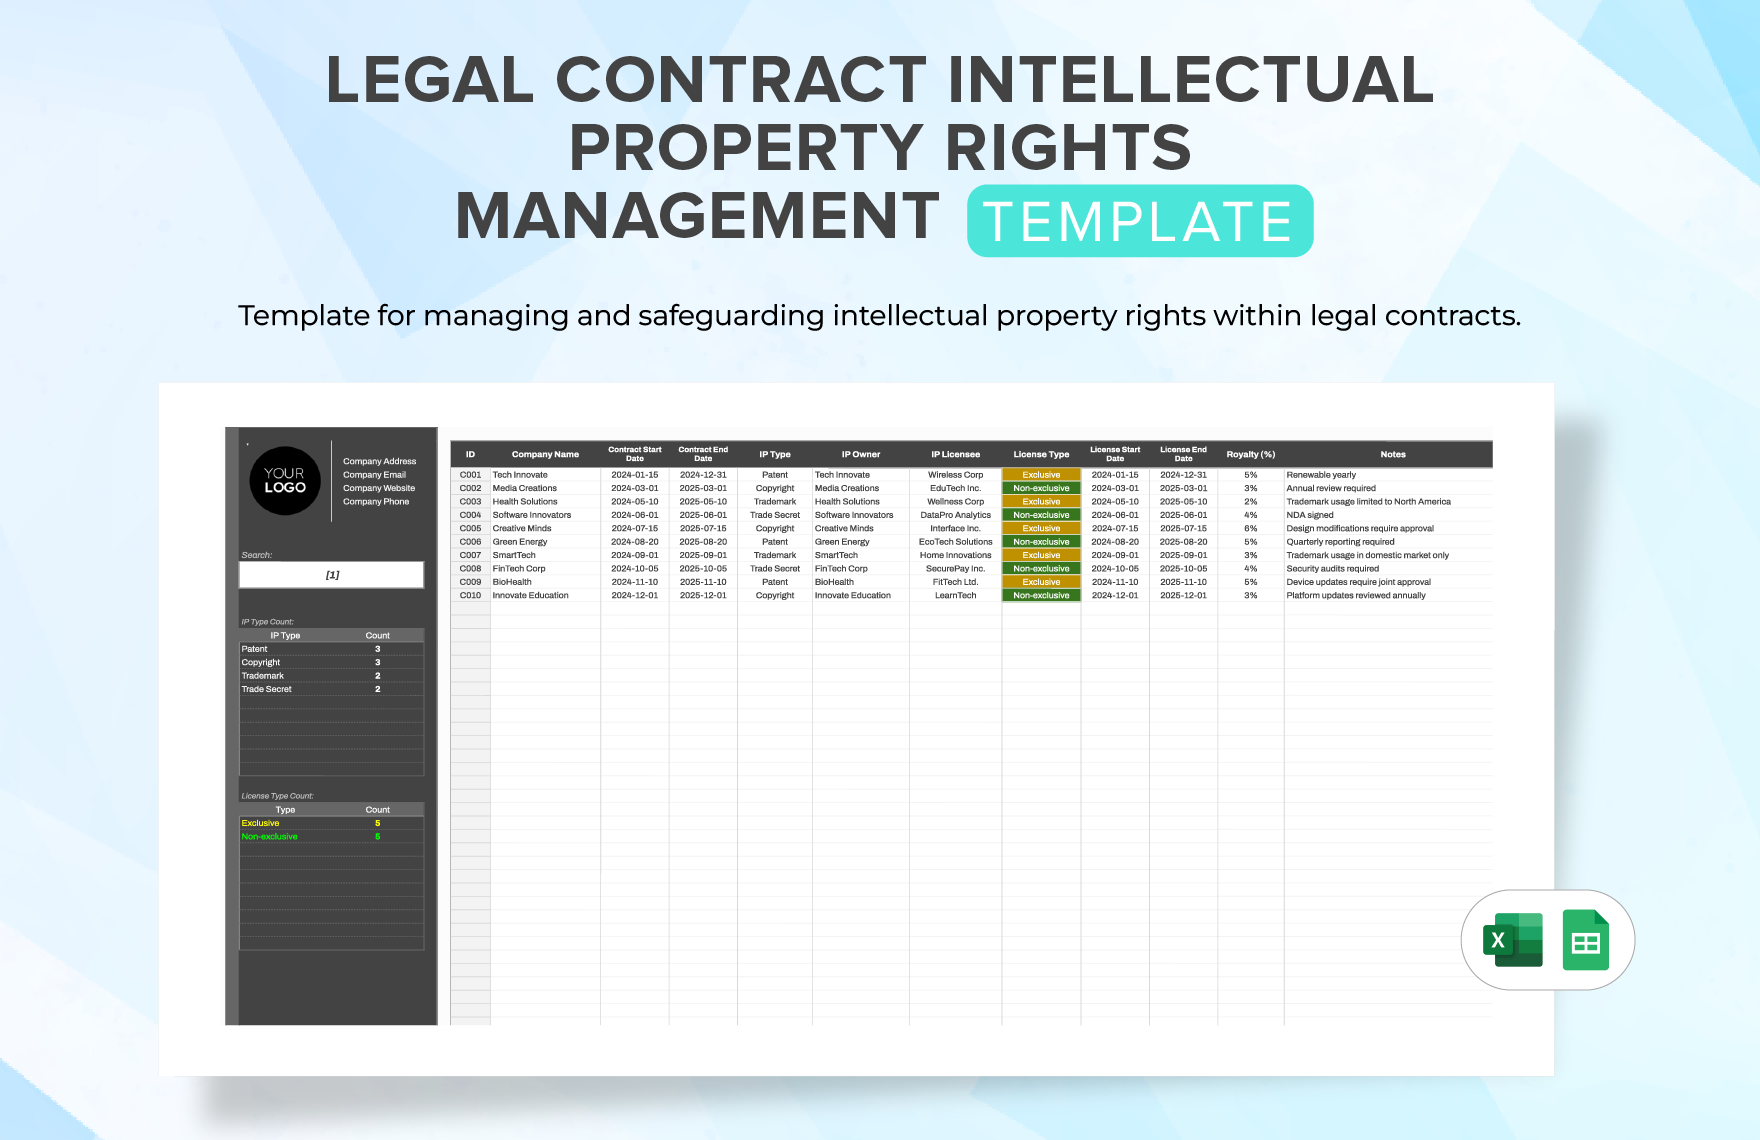 Legal Contract Intellectual Property Rights Management Template in Excel, Google Sheets